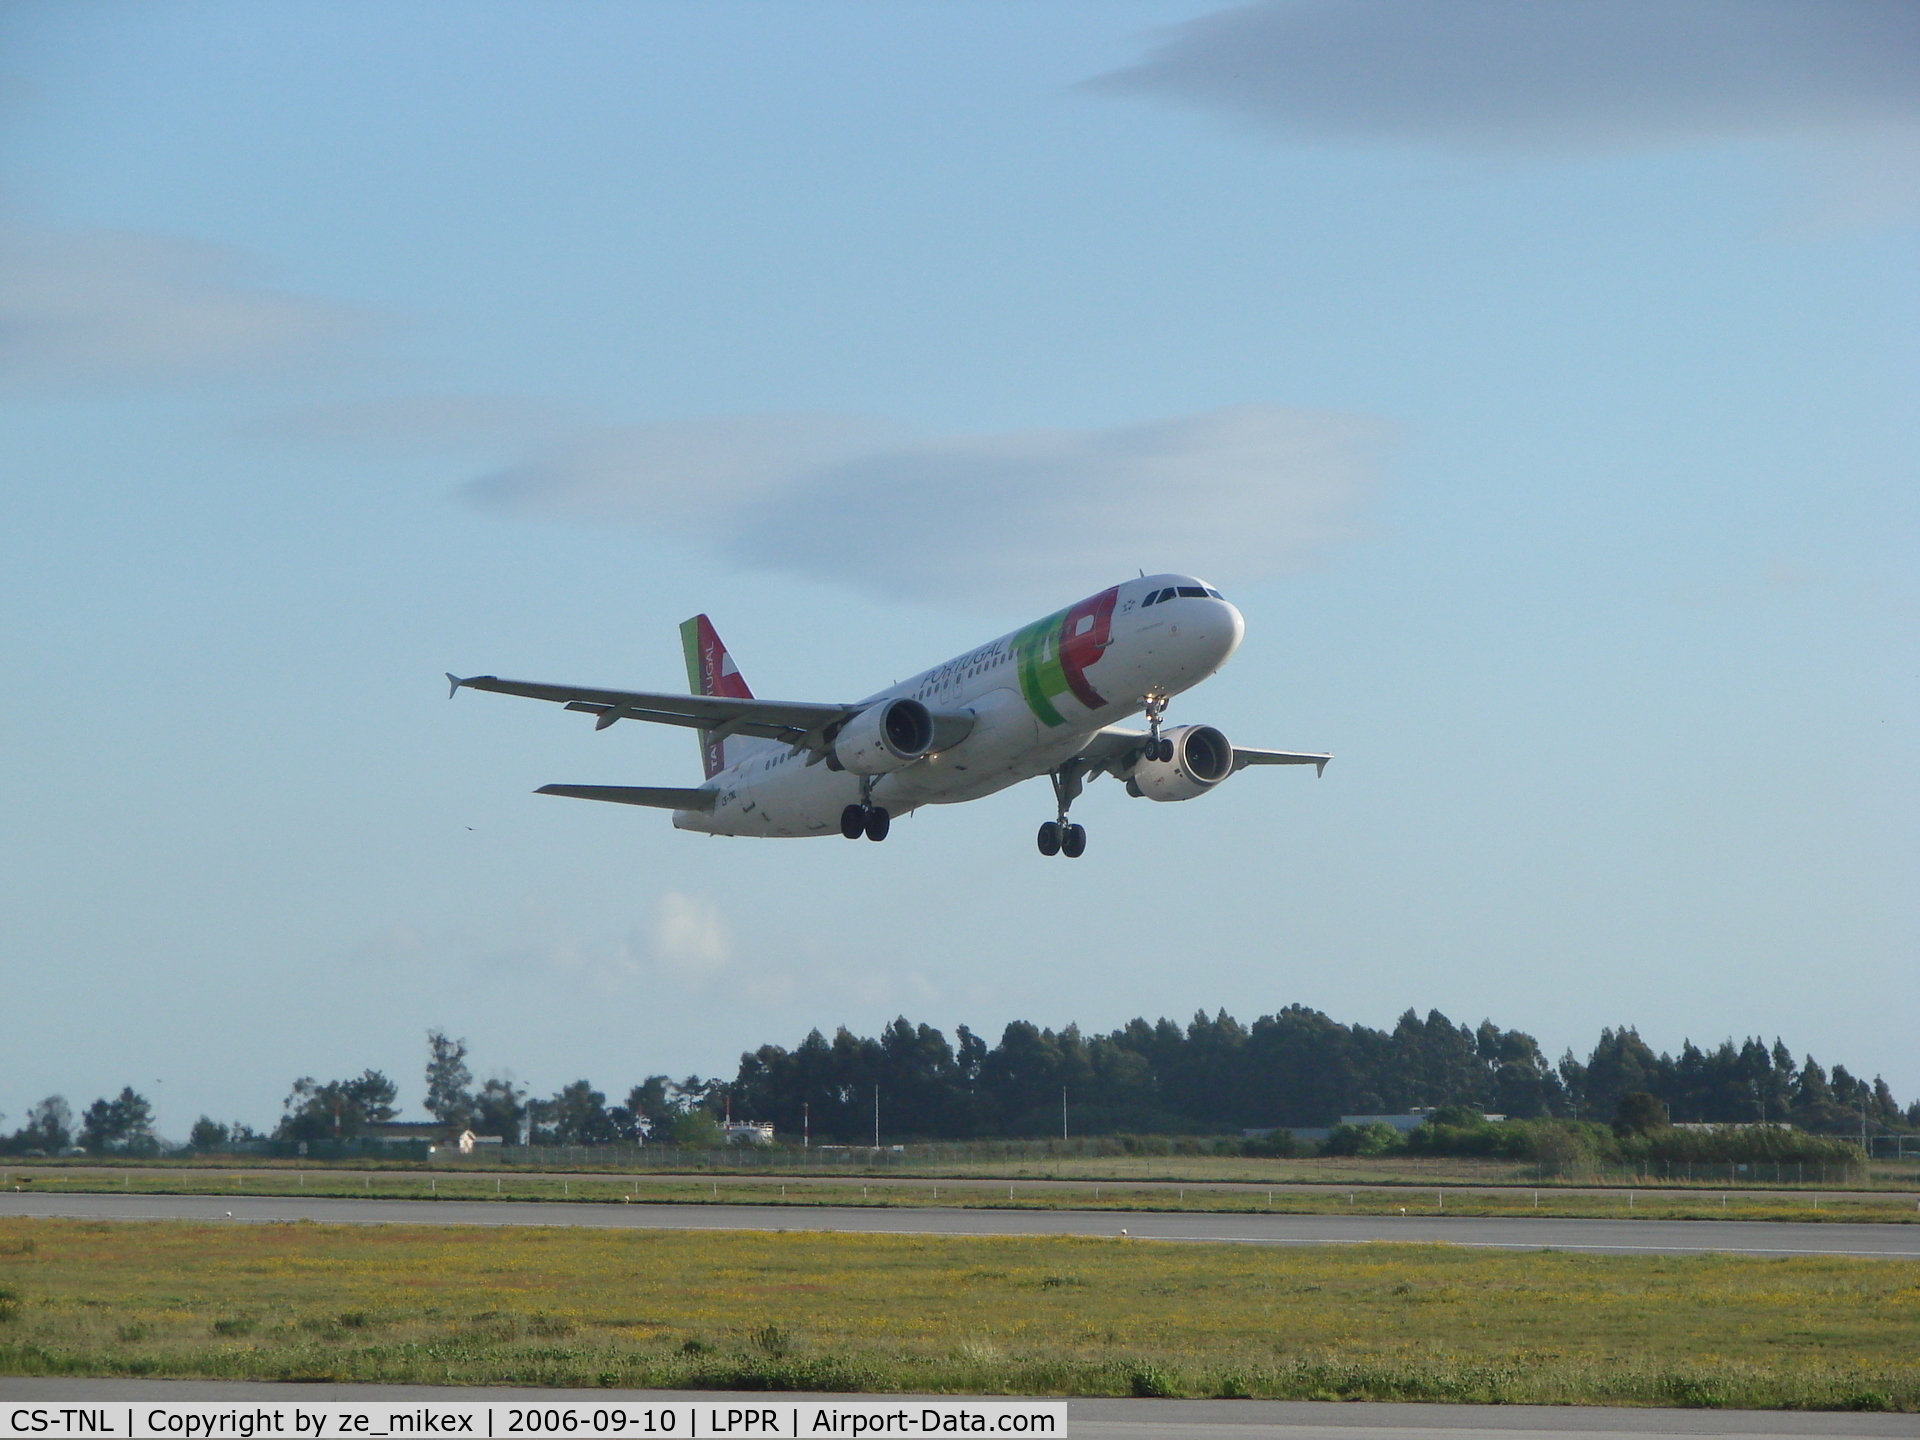 CS-TNL, 2000 Airbus A320-214 C/N 1231, Take of at oporto airport.